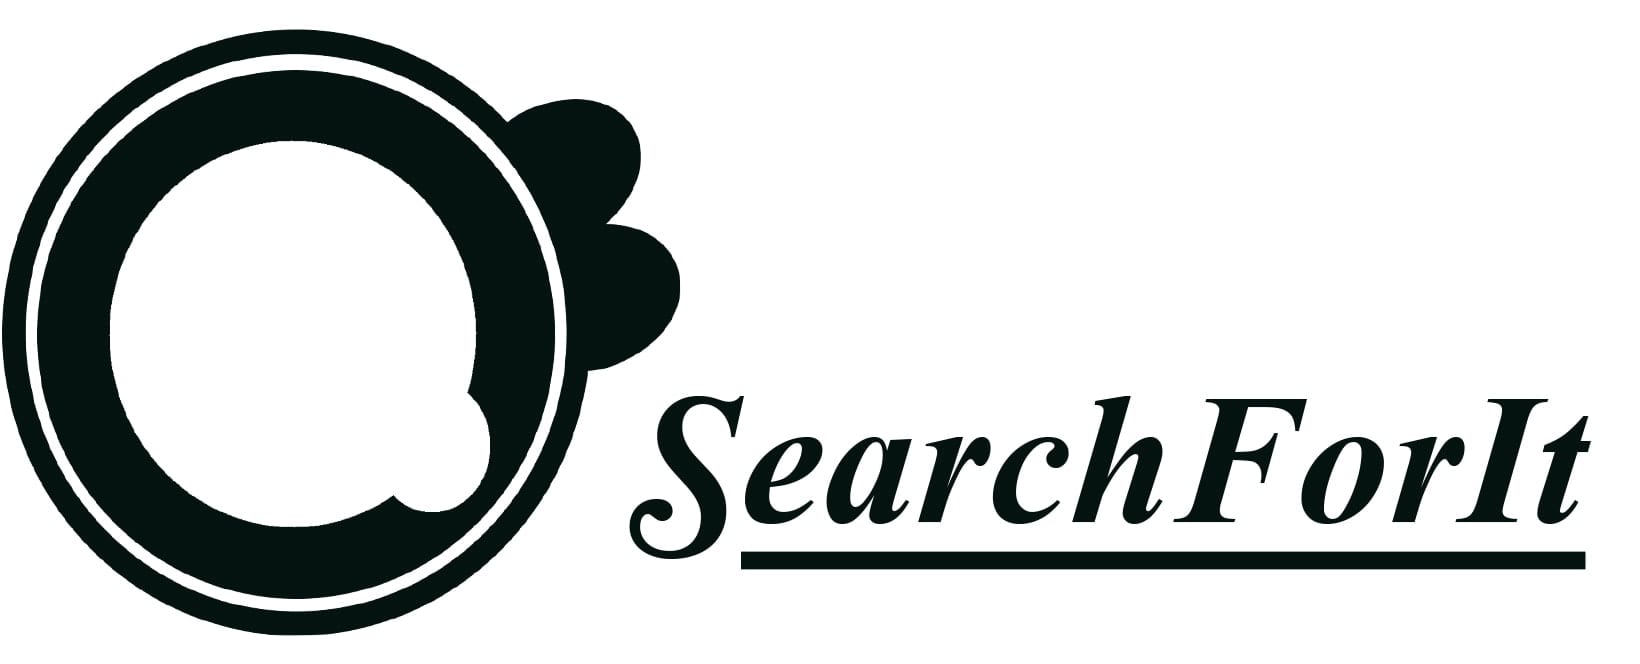 Search For It